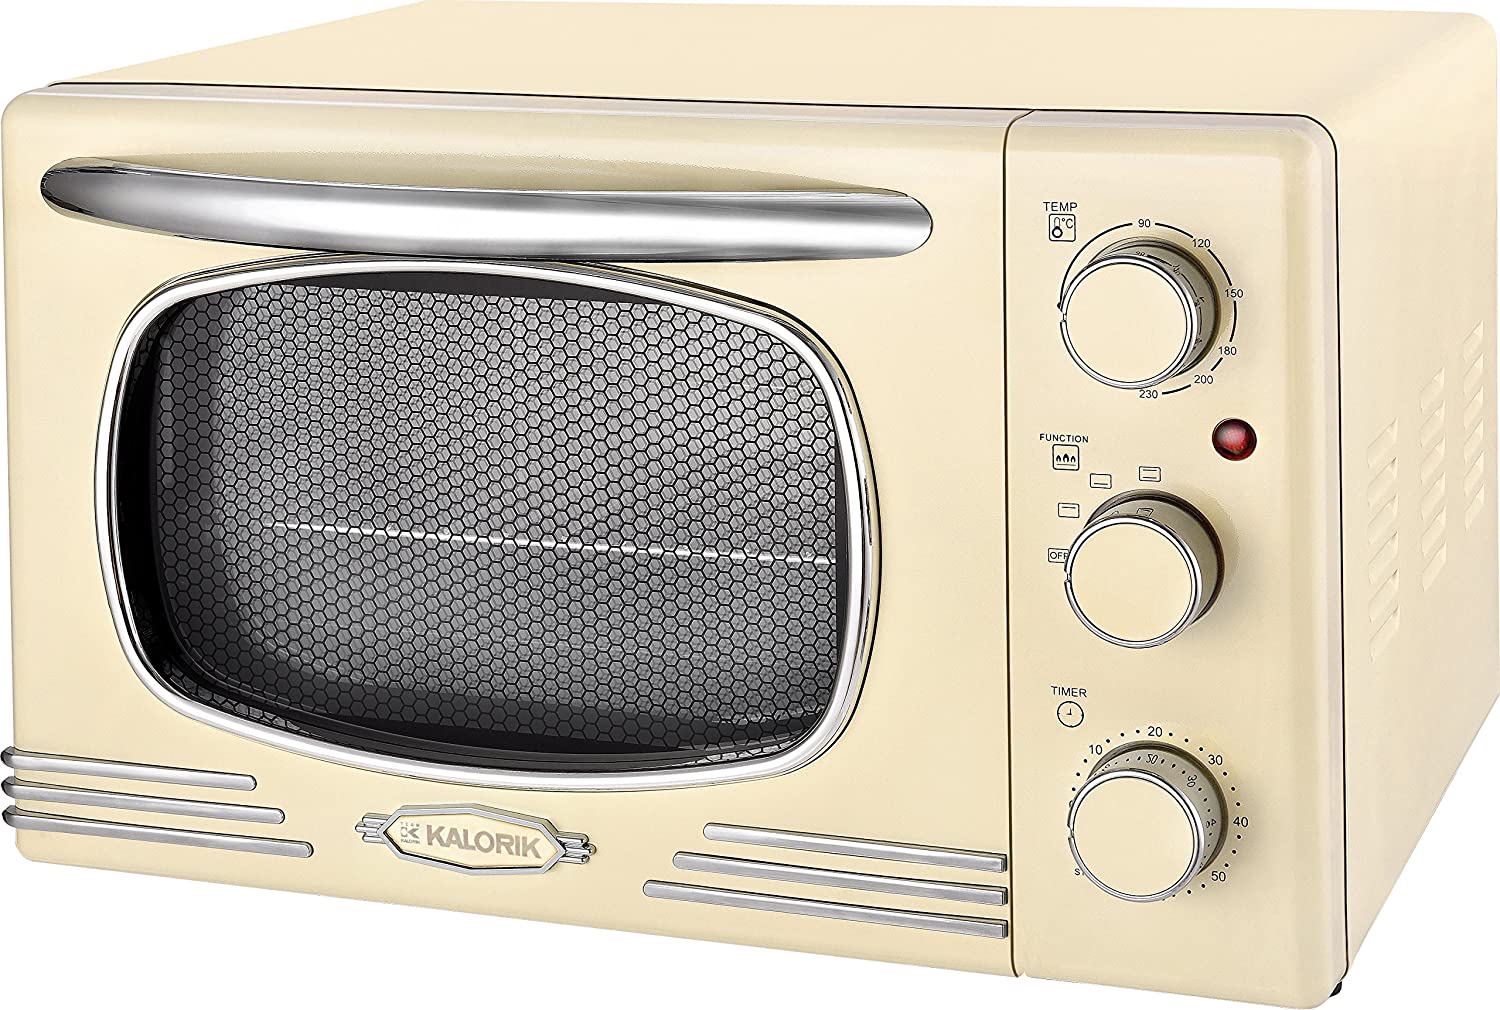 Team Kalorik Retro Oven with 19.5 Litre Capacity, Removable Aid, Baking Tray and Cooking Rack (0-230°C), 1300W, Metal/Glass, Cream White, TKG OT 2500